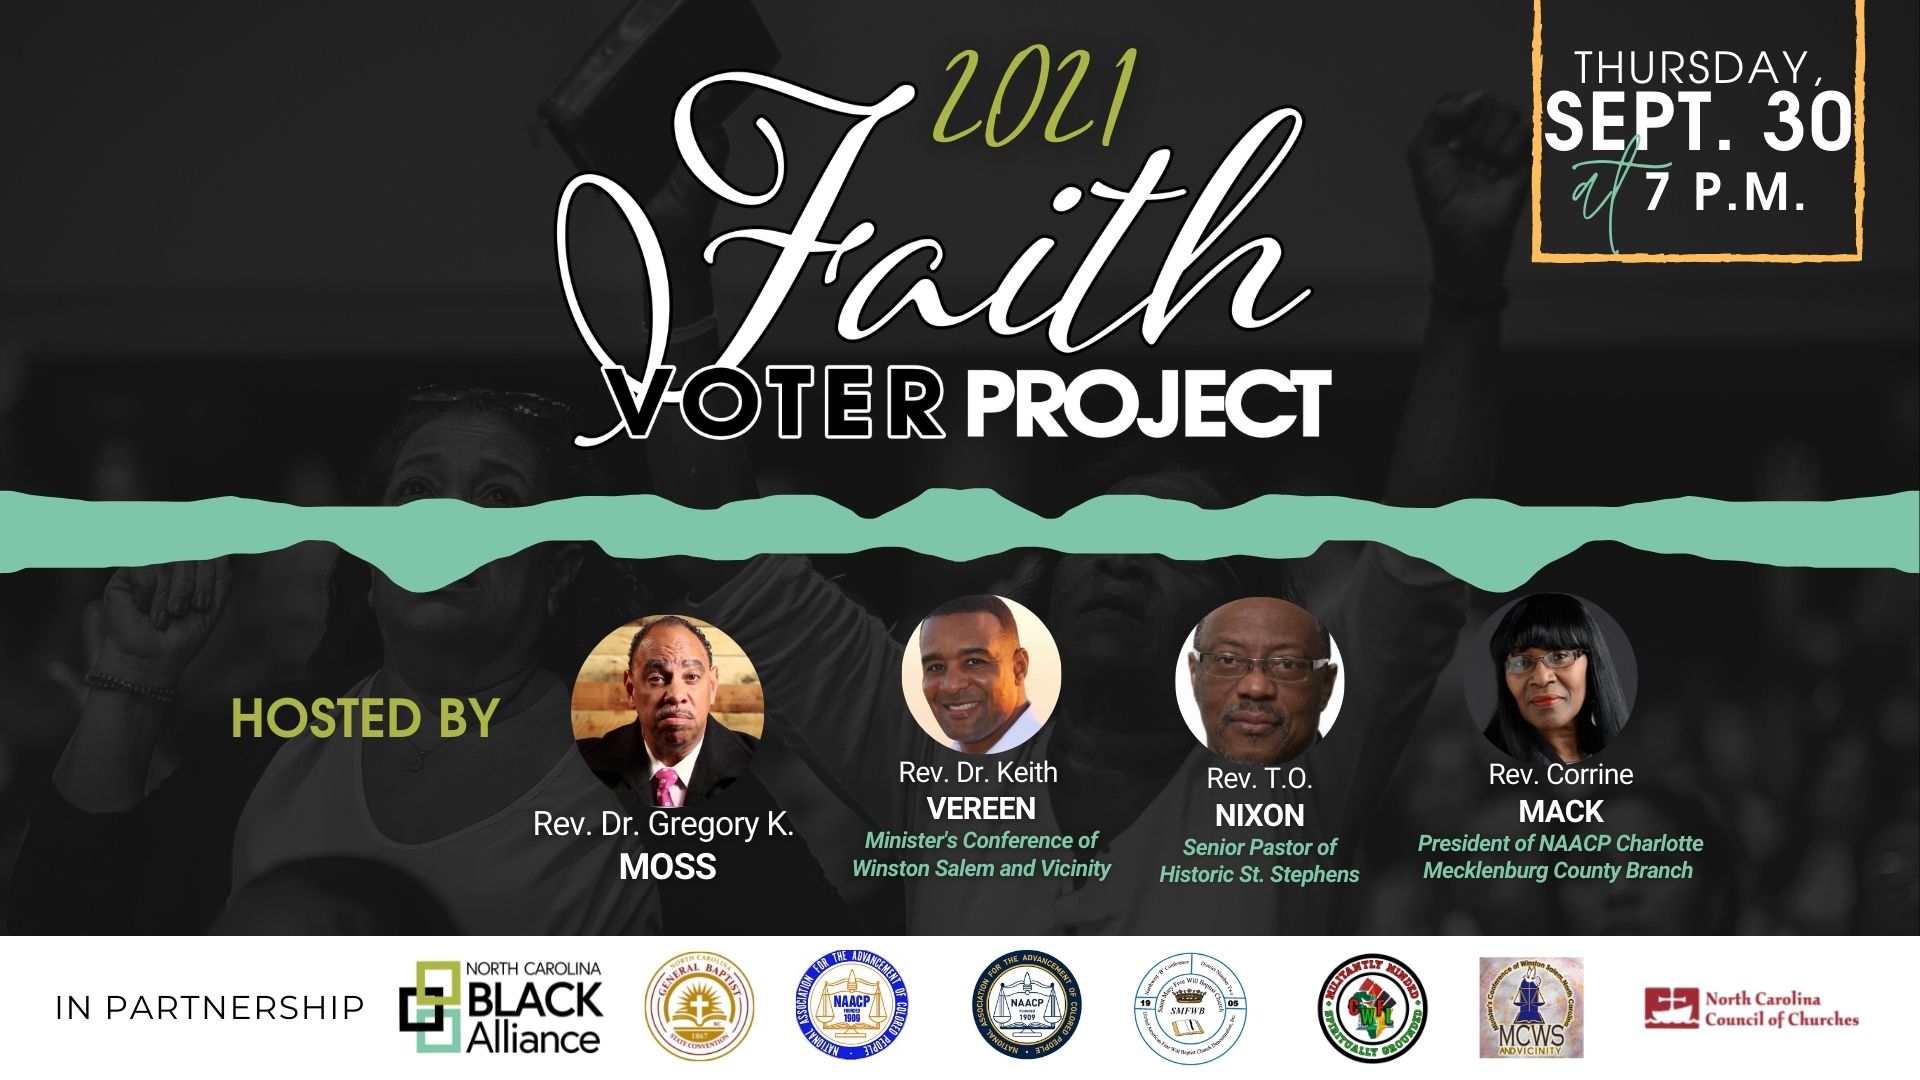 2021 Faith Voter Project on Sept. 30